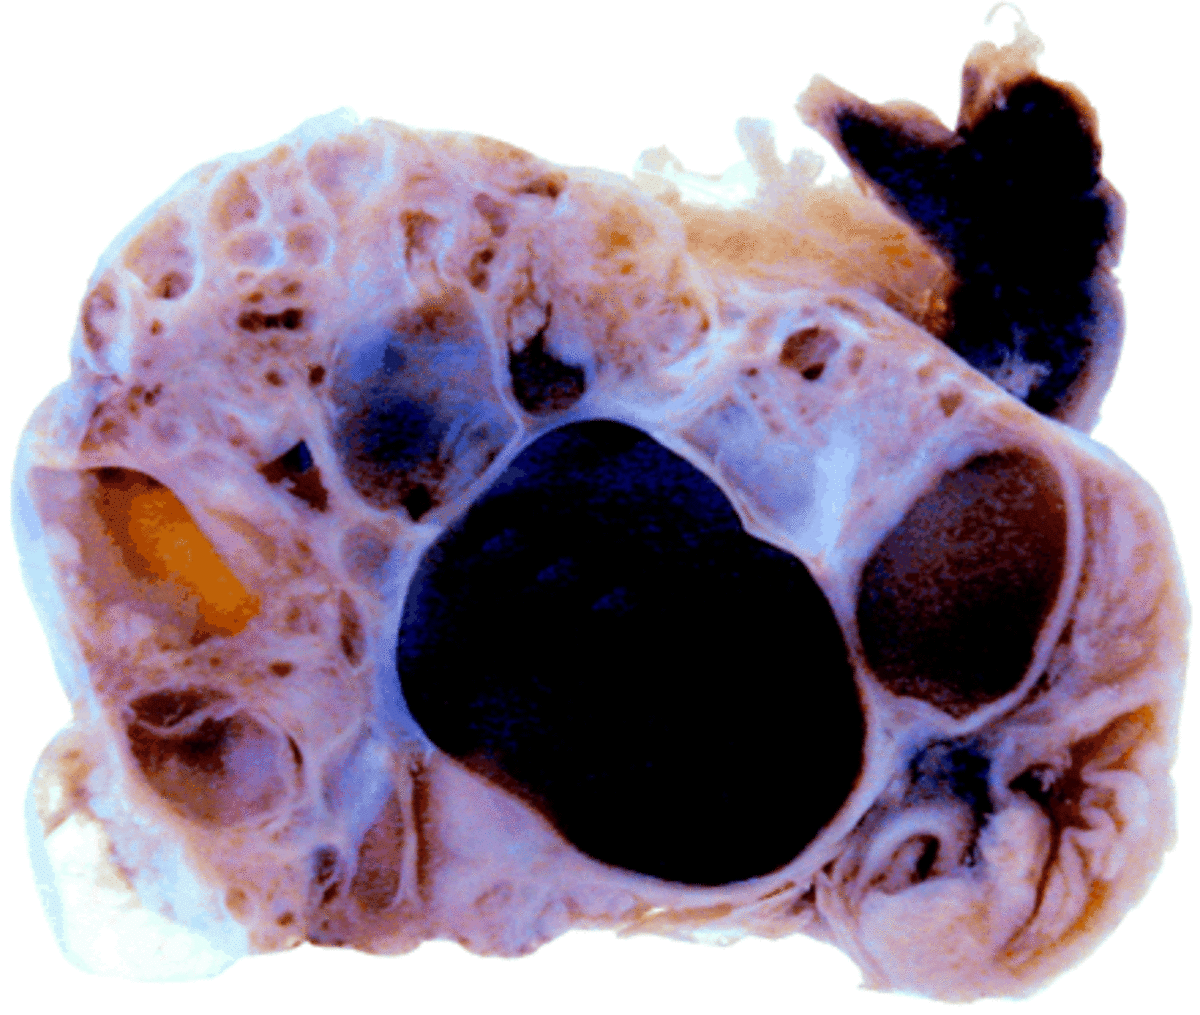 Polycystic ovary. Cysts are only small holes beyond the first layer of ovary.